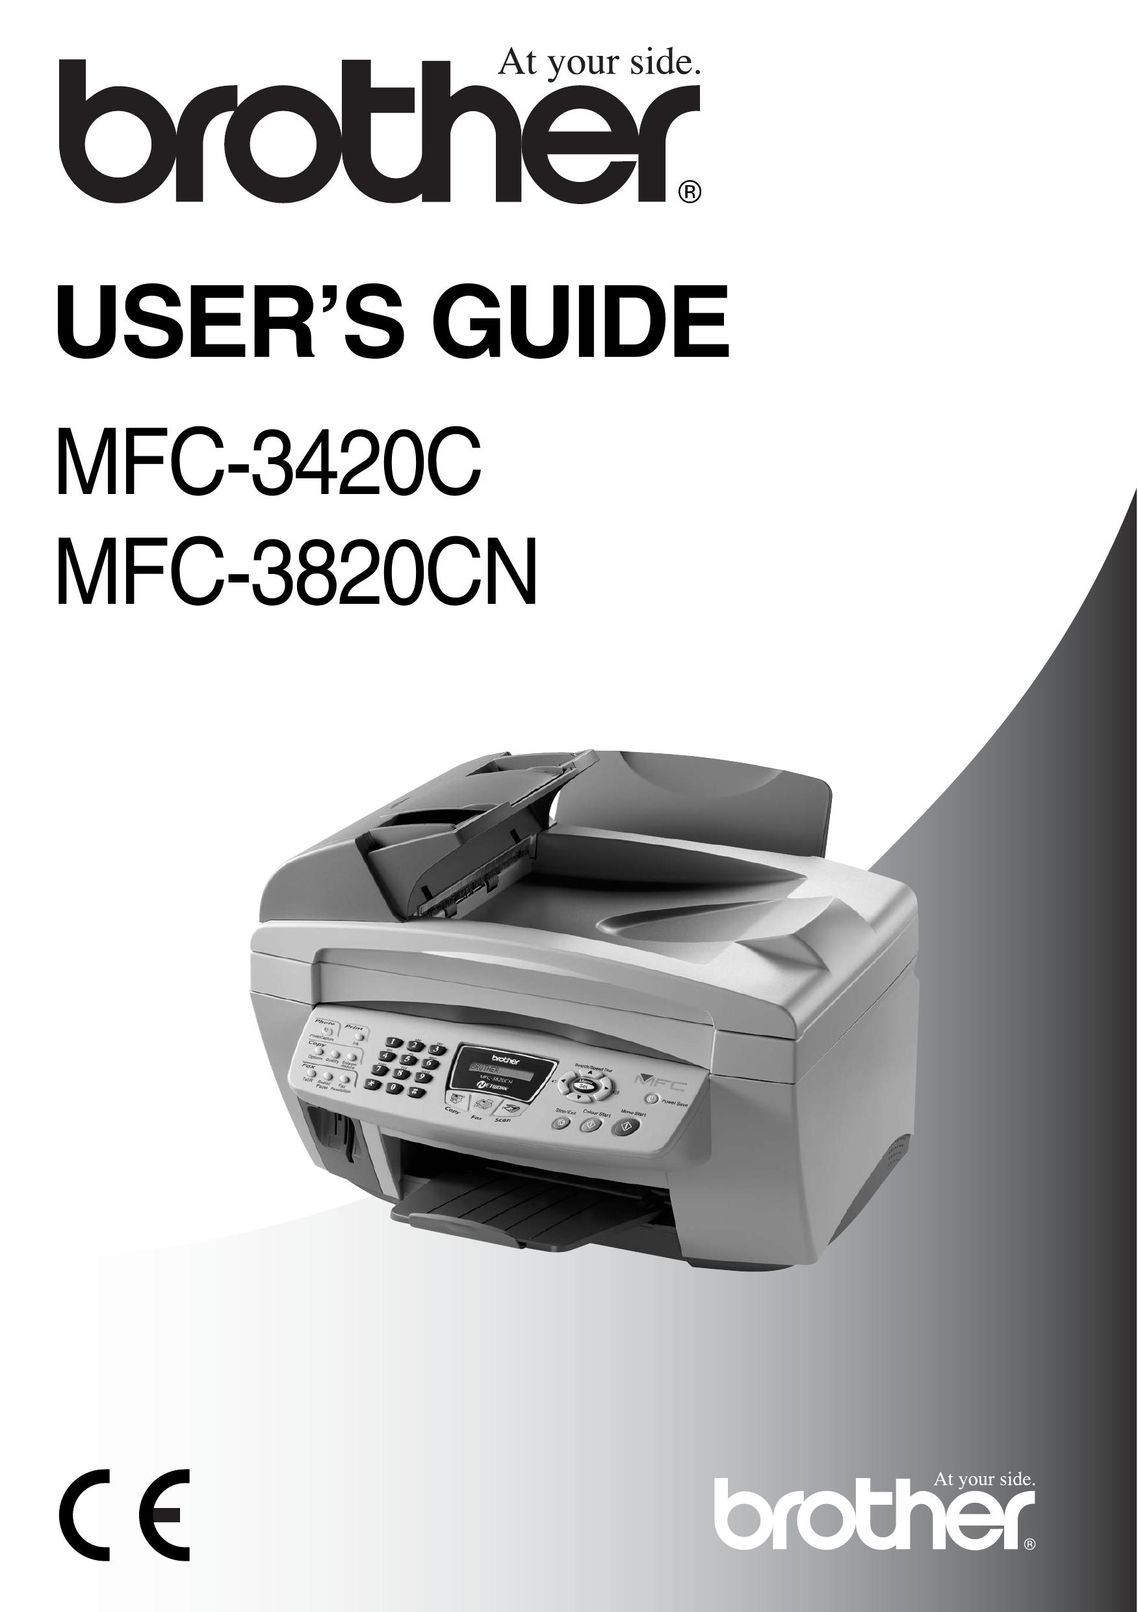 Nordic Star Products MFC-3820CN All in One Printer User Manual